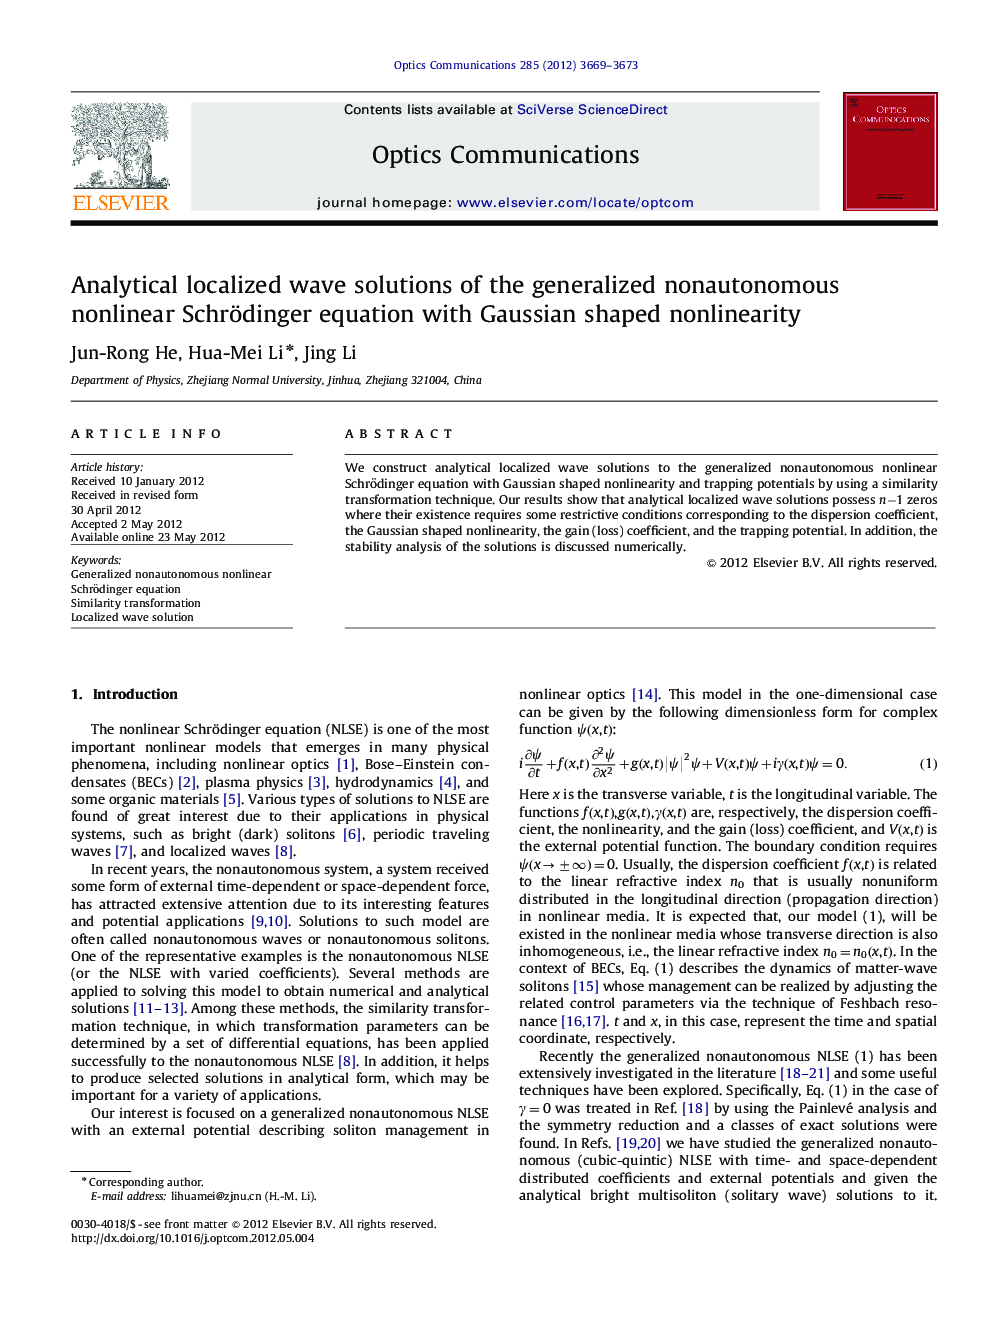 Analytical localized wave solutions of the generalized nonautonomous nonlinear Schrödinger equation with Gaussian shaped nonlinearity